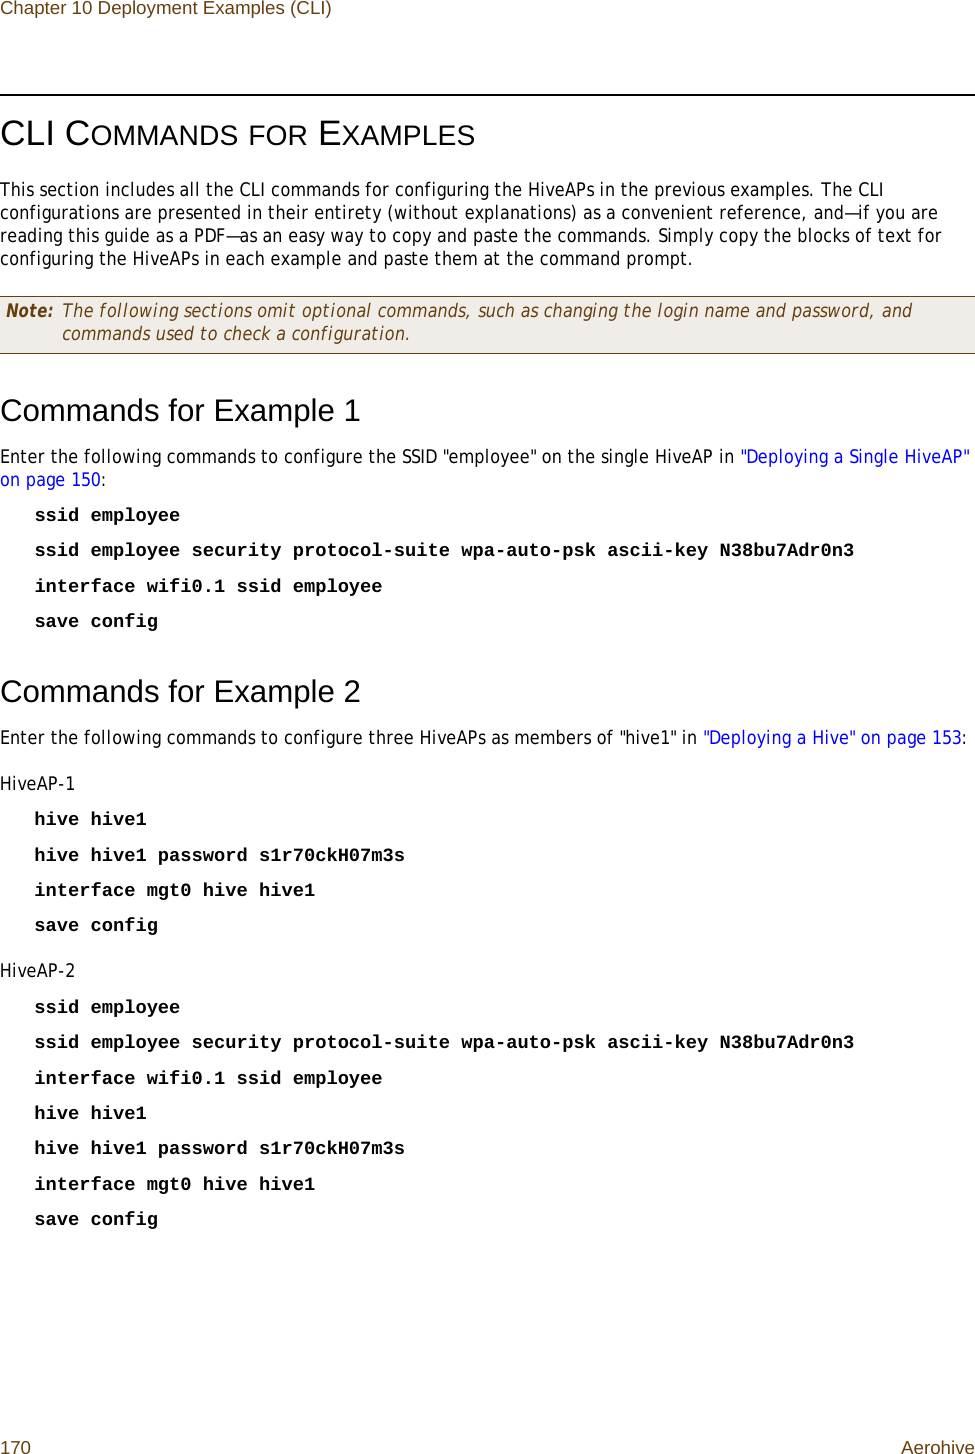 Chapter 10 Deployment Examples (CLI)170 AerohiveCLI COMMANDS FOR EXAMPLESThis section includes all the CLI commands for configuring the HiveAPs in the previous examples. The CLI configurations are presented in their entirety (without explanations) as a convenient reference, and—if you are reading this guide as a PDF—as an easy way to copy and paste the commands. Simply copy the blocks of text for configuring the HiveAPs in each example and paste them at the command prompt.Commands for Example 1Enter the following commands to configure the SSID &quot;employee&quot; on the single HiveAP in &quot;Deploying a Single HiveAP&quot; on page 150:ssid employeessid employee security protocol-suite wpa-auto-psk ascii-key N38bu7Adr0n3interface wifi0.1 ssid employeesave configCommands for Example 2Enter the following commands to configure three HiveAPs as members of &quot;hive1&quot; in &quot;Deploying a Hive&quot; on page 153:HiveAP-1hive hive1hive hive1 password s1r70ckH07m3sinterface mgt0 hive hive1save configHiveAP-2ssid employeessid employee security protocol-suite wpa-auto-psk ascii-key N38bu7Adr0n3interface wifi0.1 ssid employeehive hive1hive hive1 password s1r70ckH07m3sinterface mgt0 hive hive1save configNote: The following sections omit optional commands, such as changing the login name and password, and commands used to check a configuration.